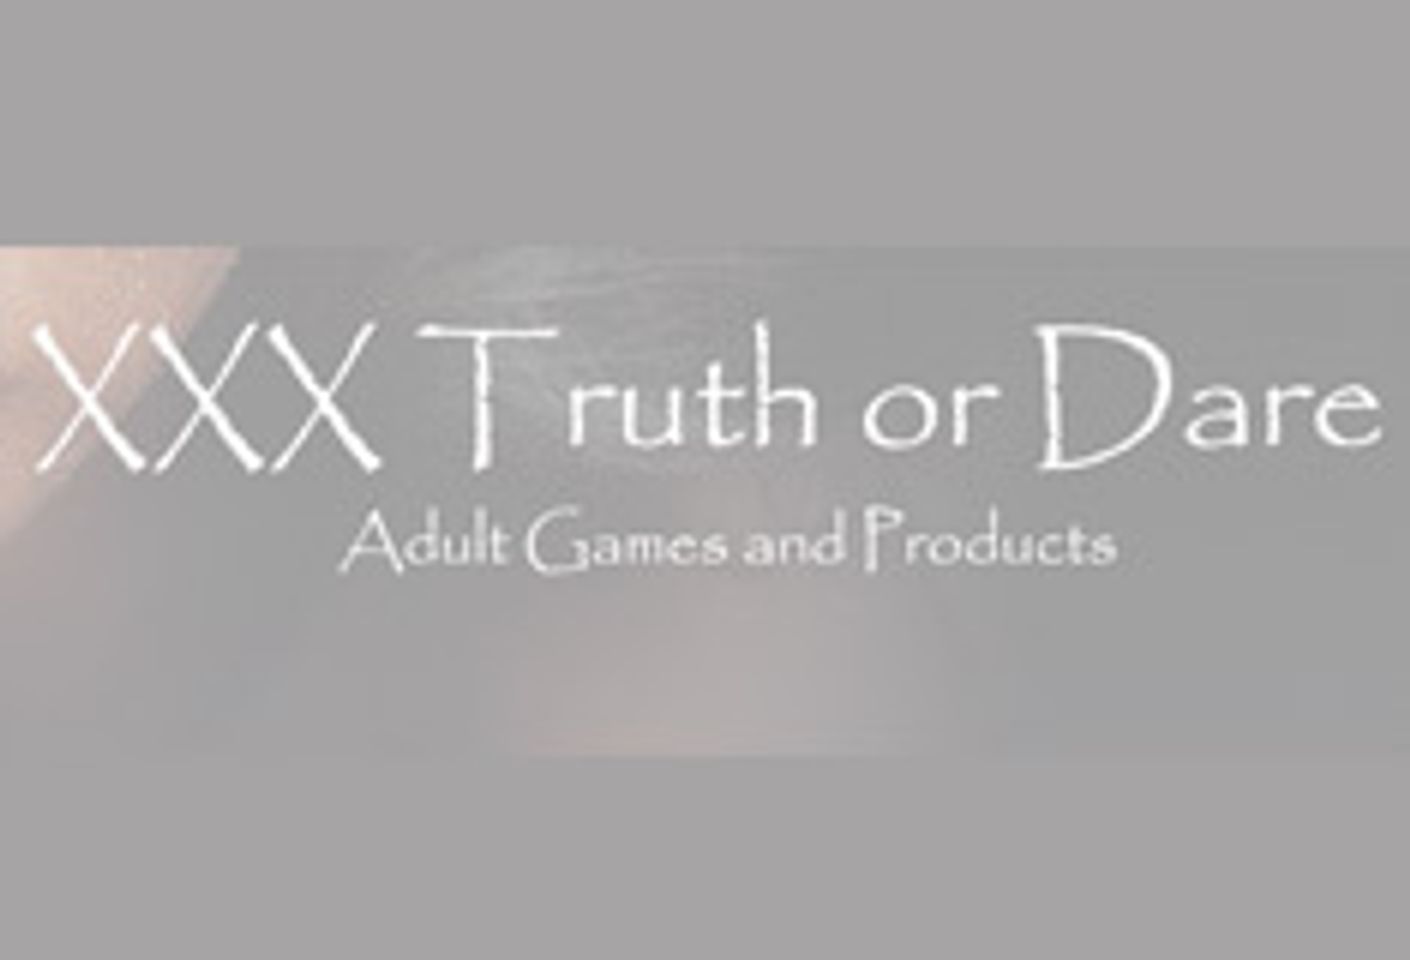 XXX Truth or Dare Donation to HIV/AIDS Research Rejected